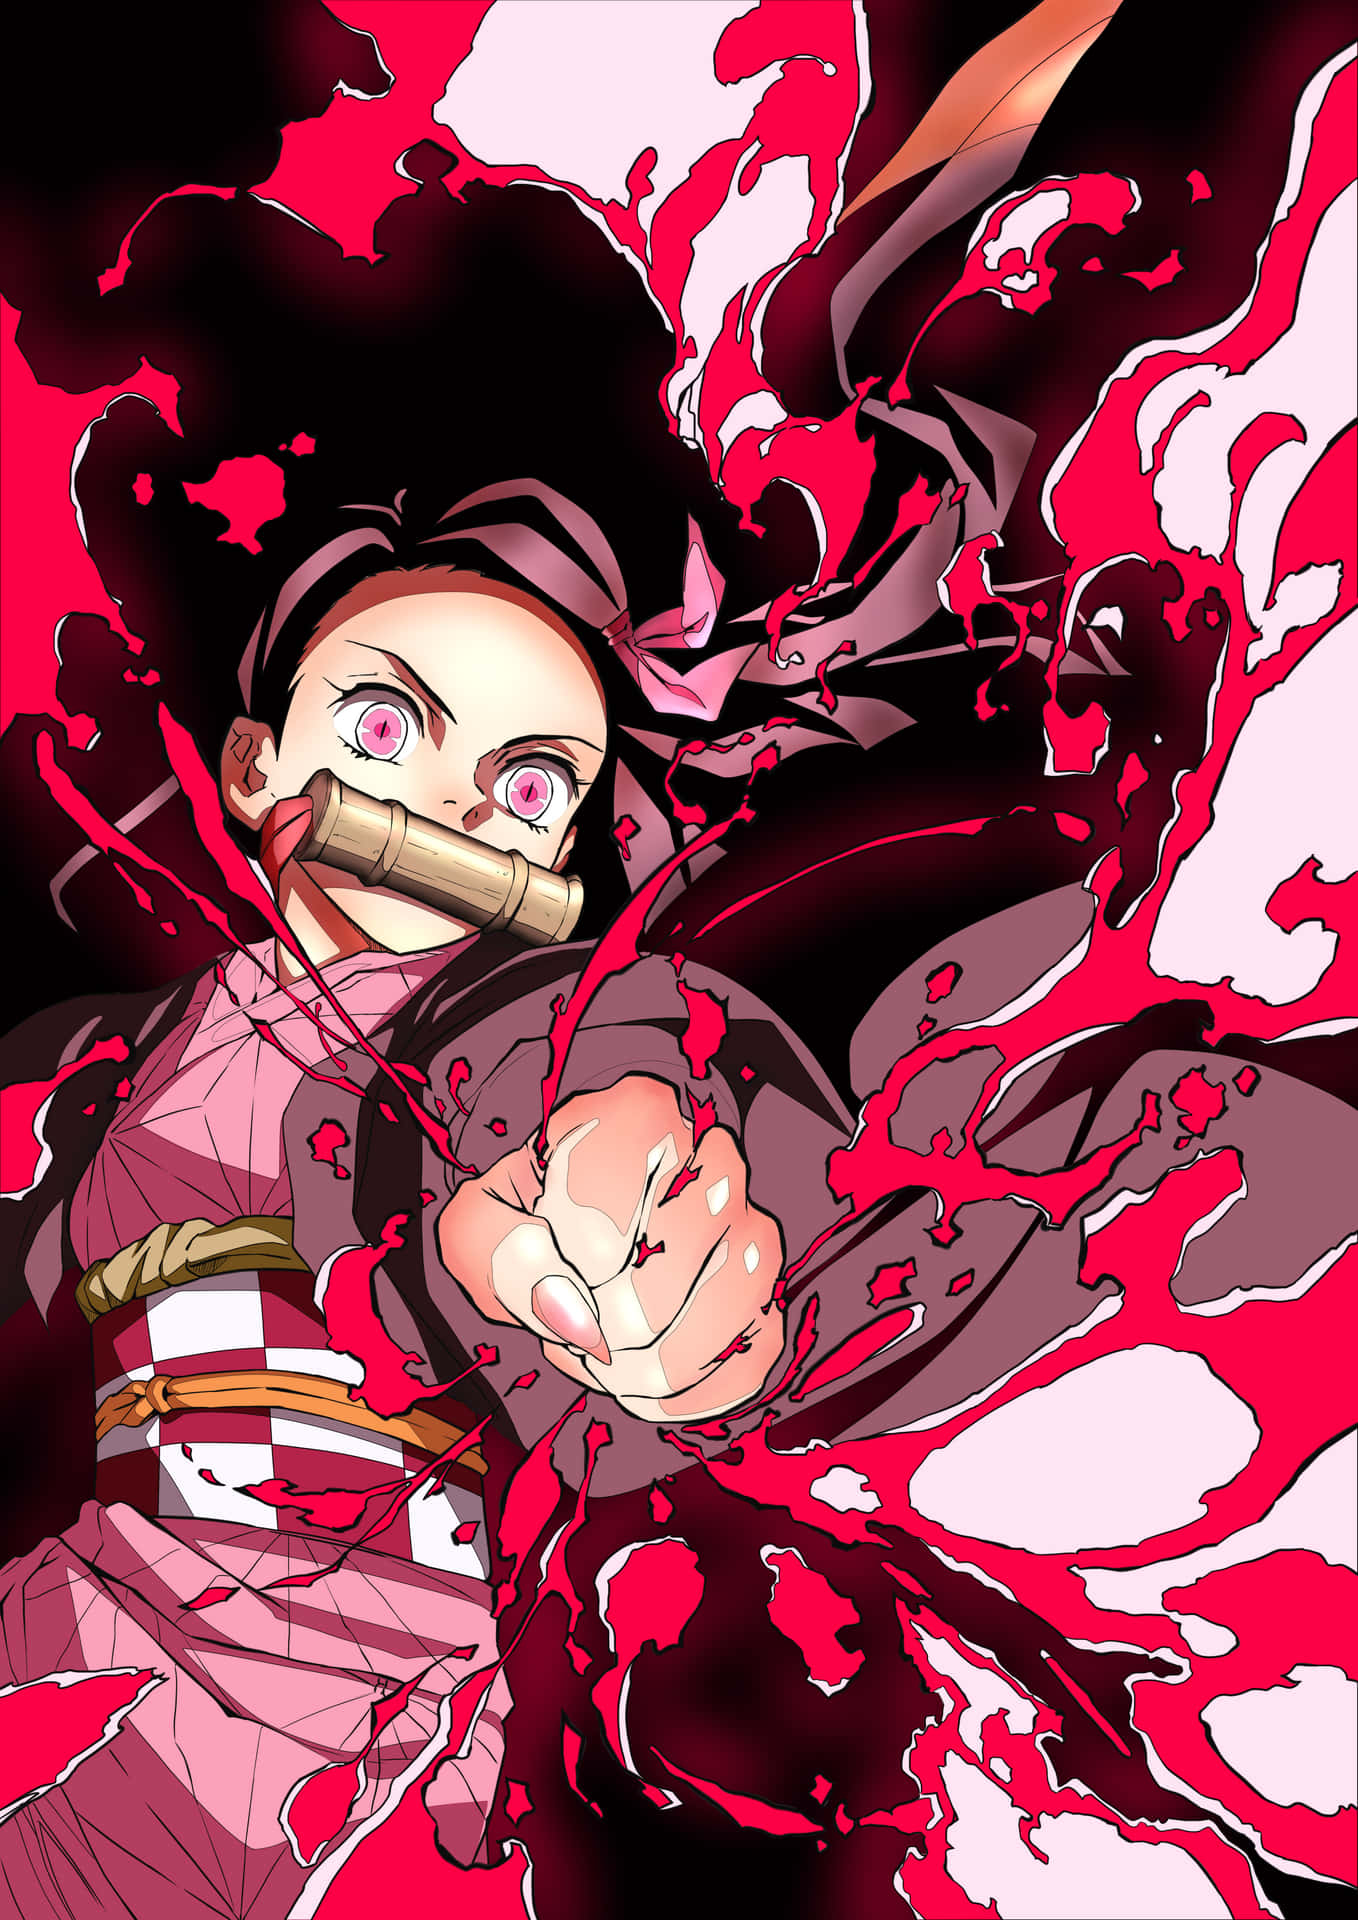 Look who's got a cool new style - Nezuko! Wallpaper